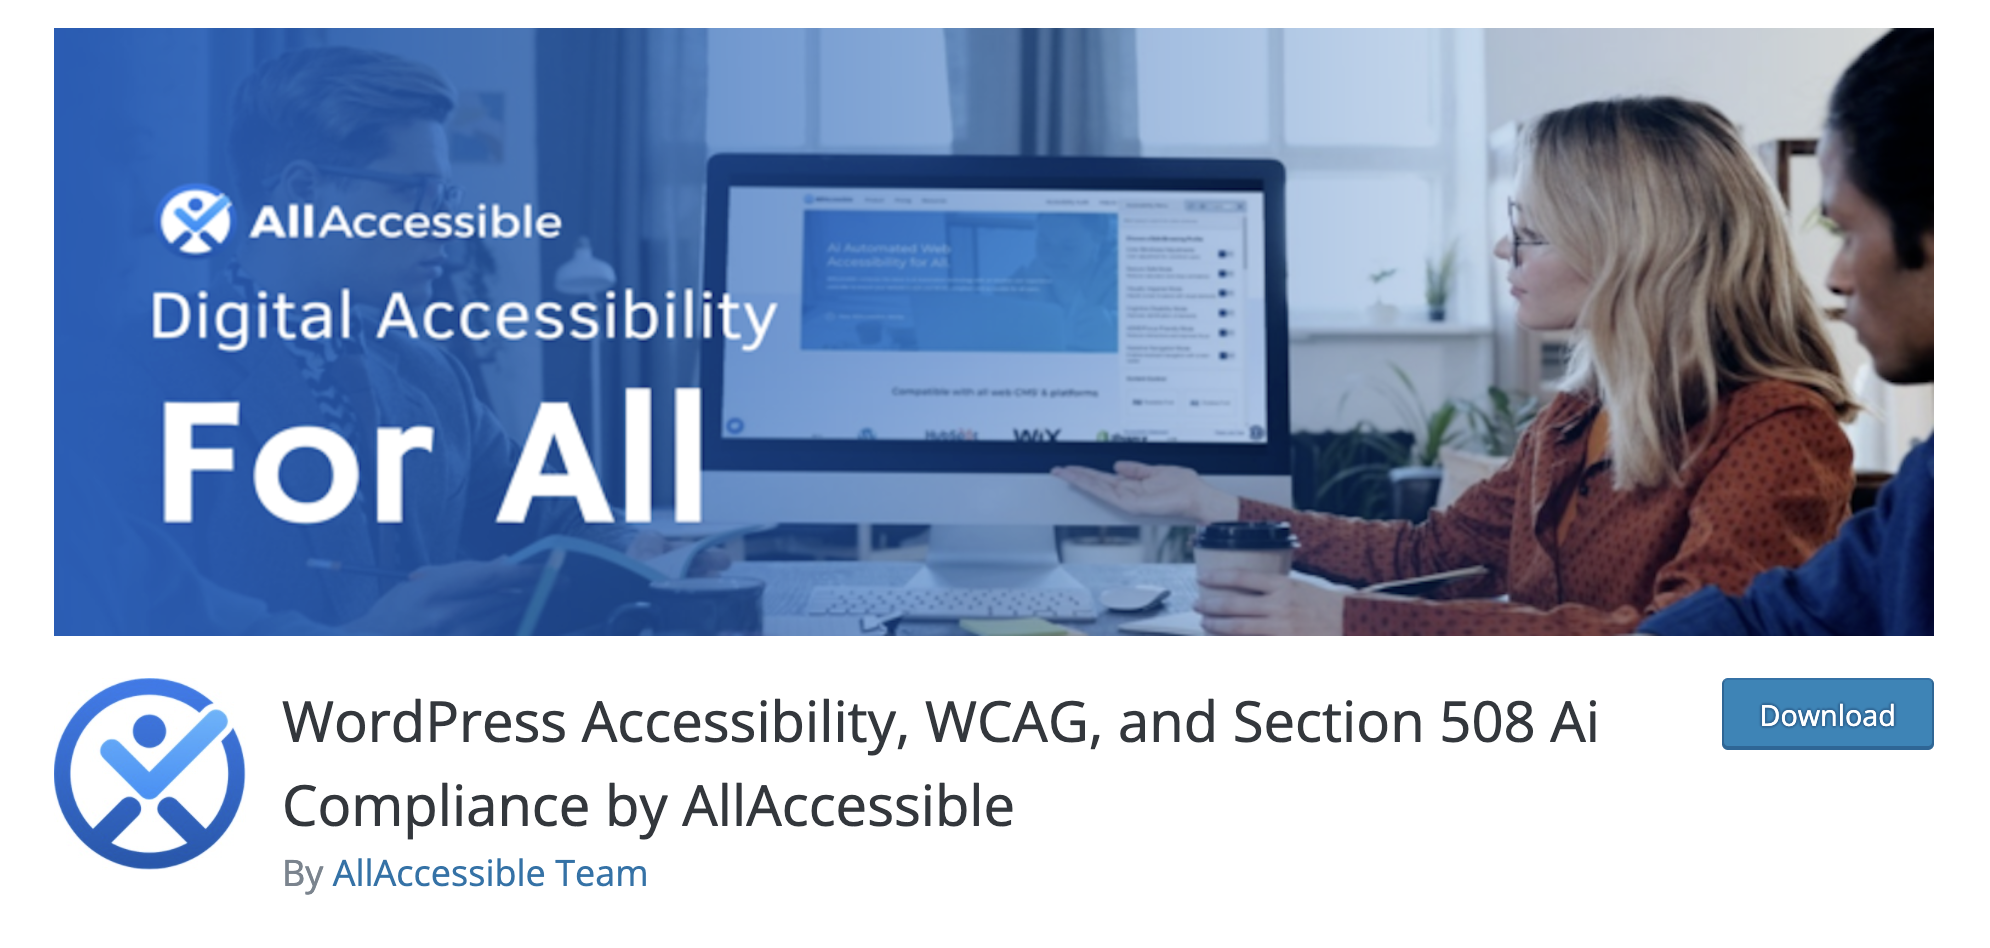 Accessibility Tool for Wordpress - WCAG SECTION 508